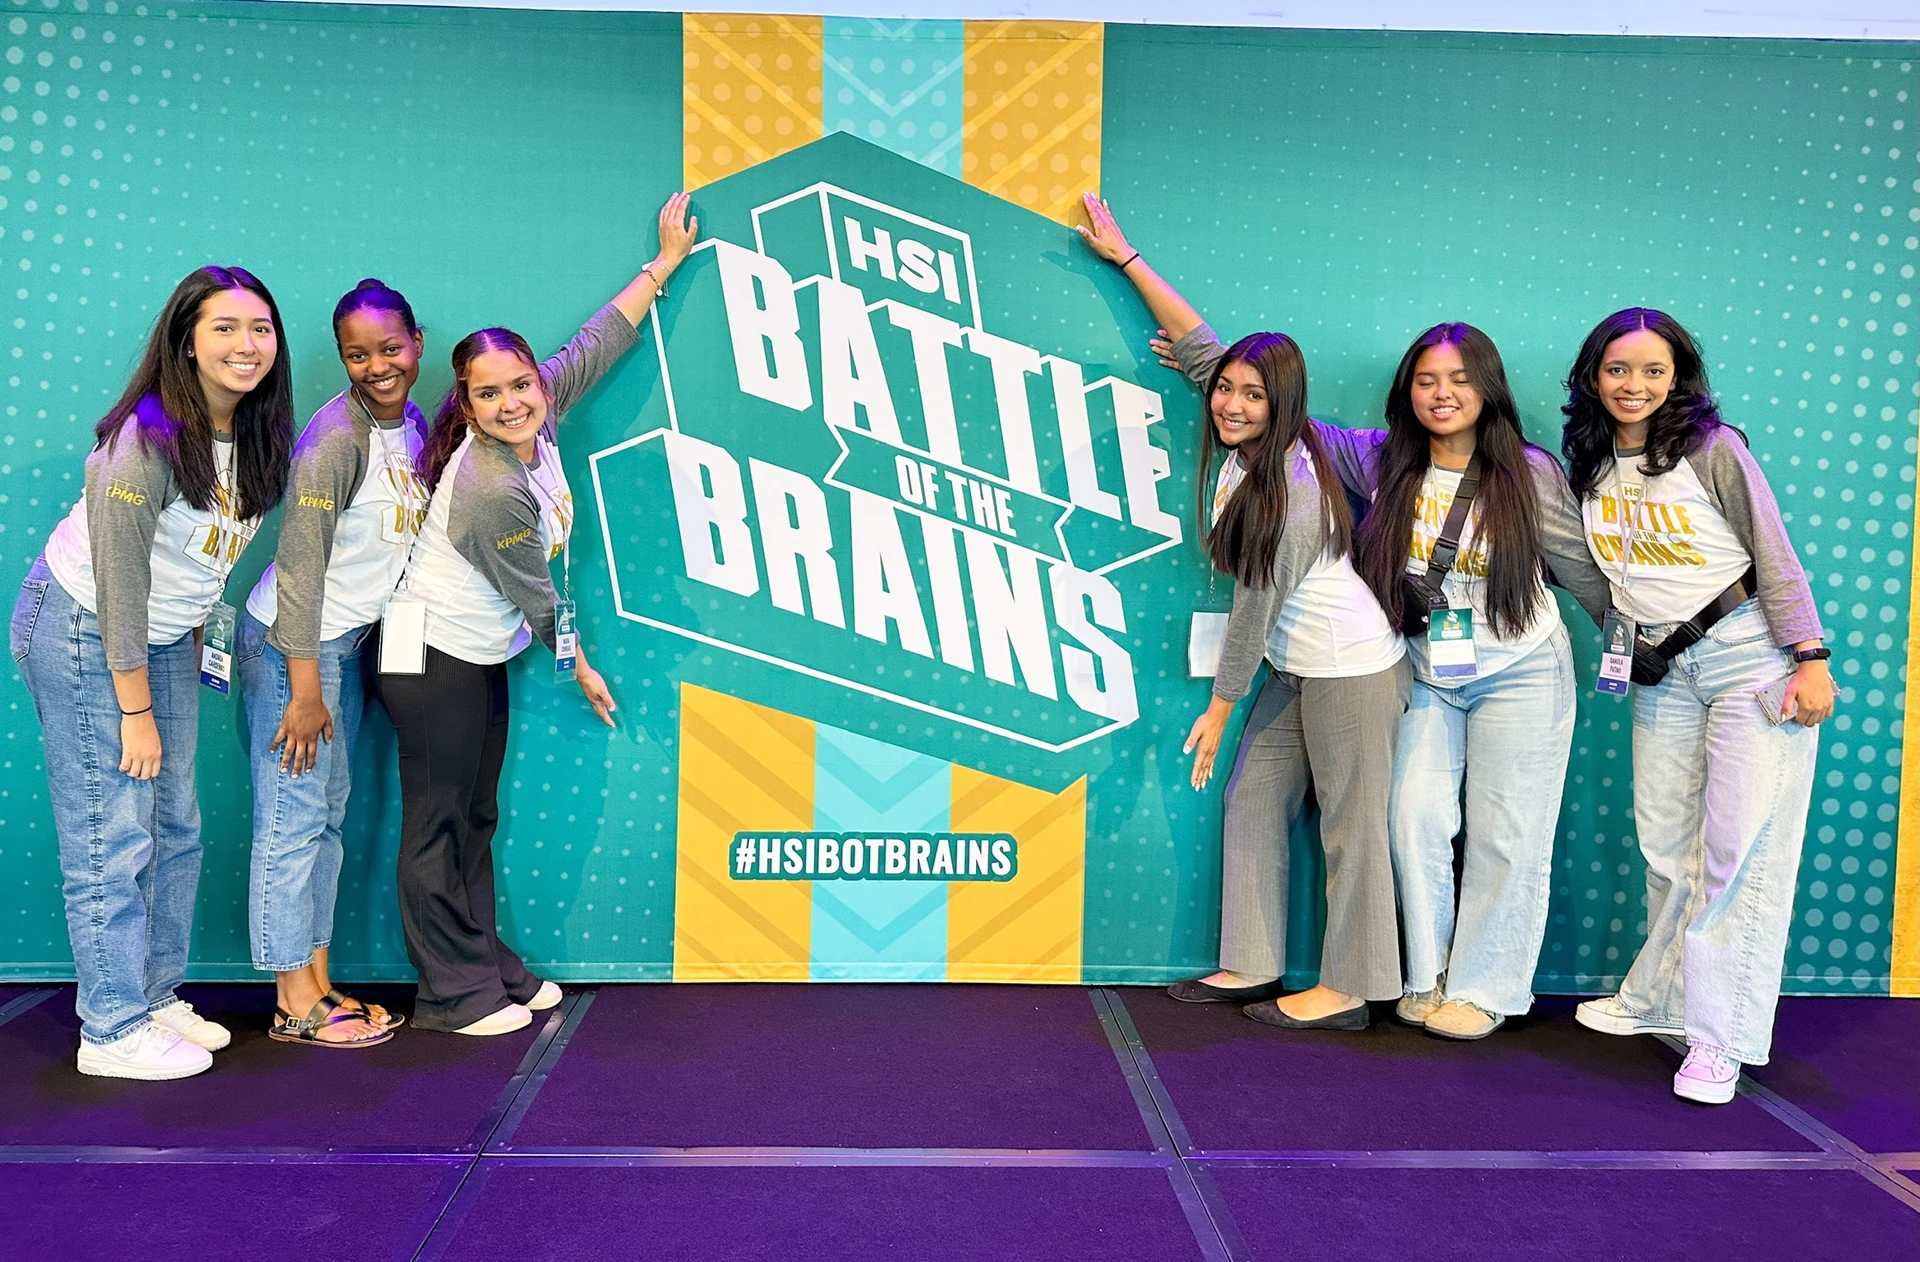 SWAU Team at HSI Battle of the Brains